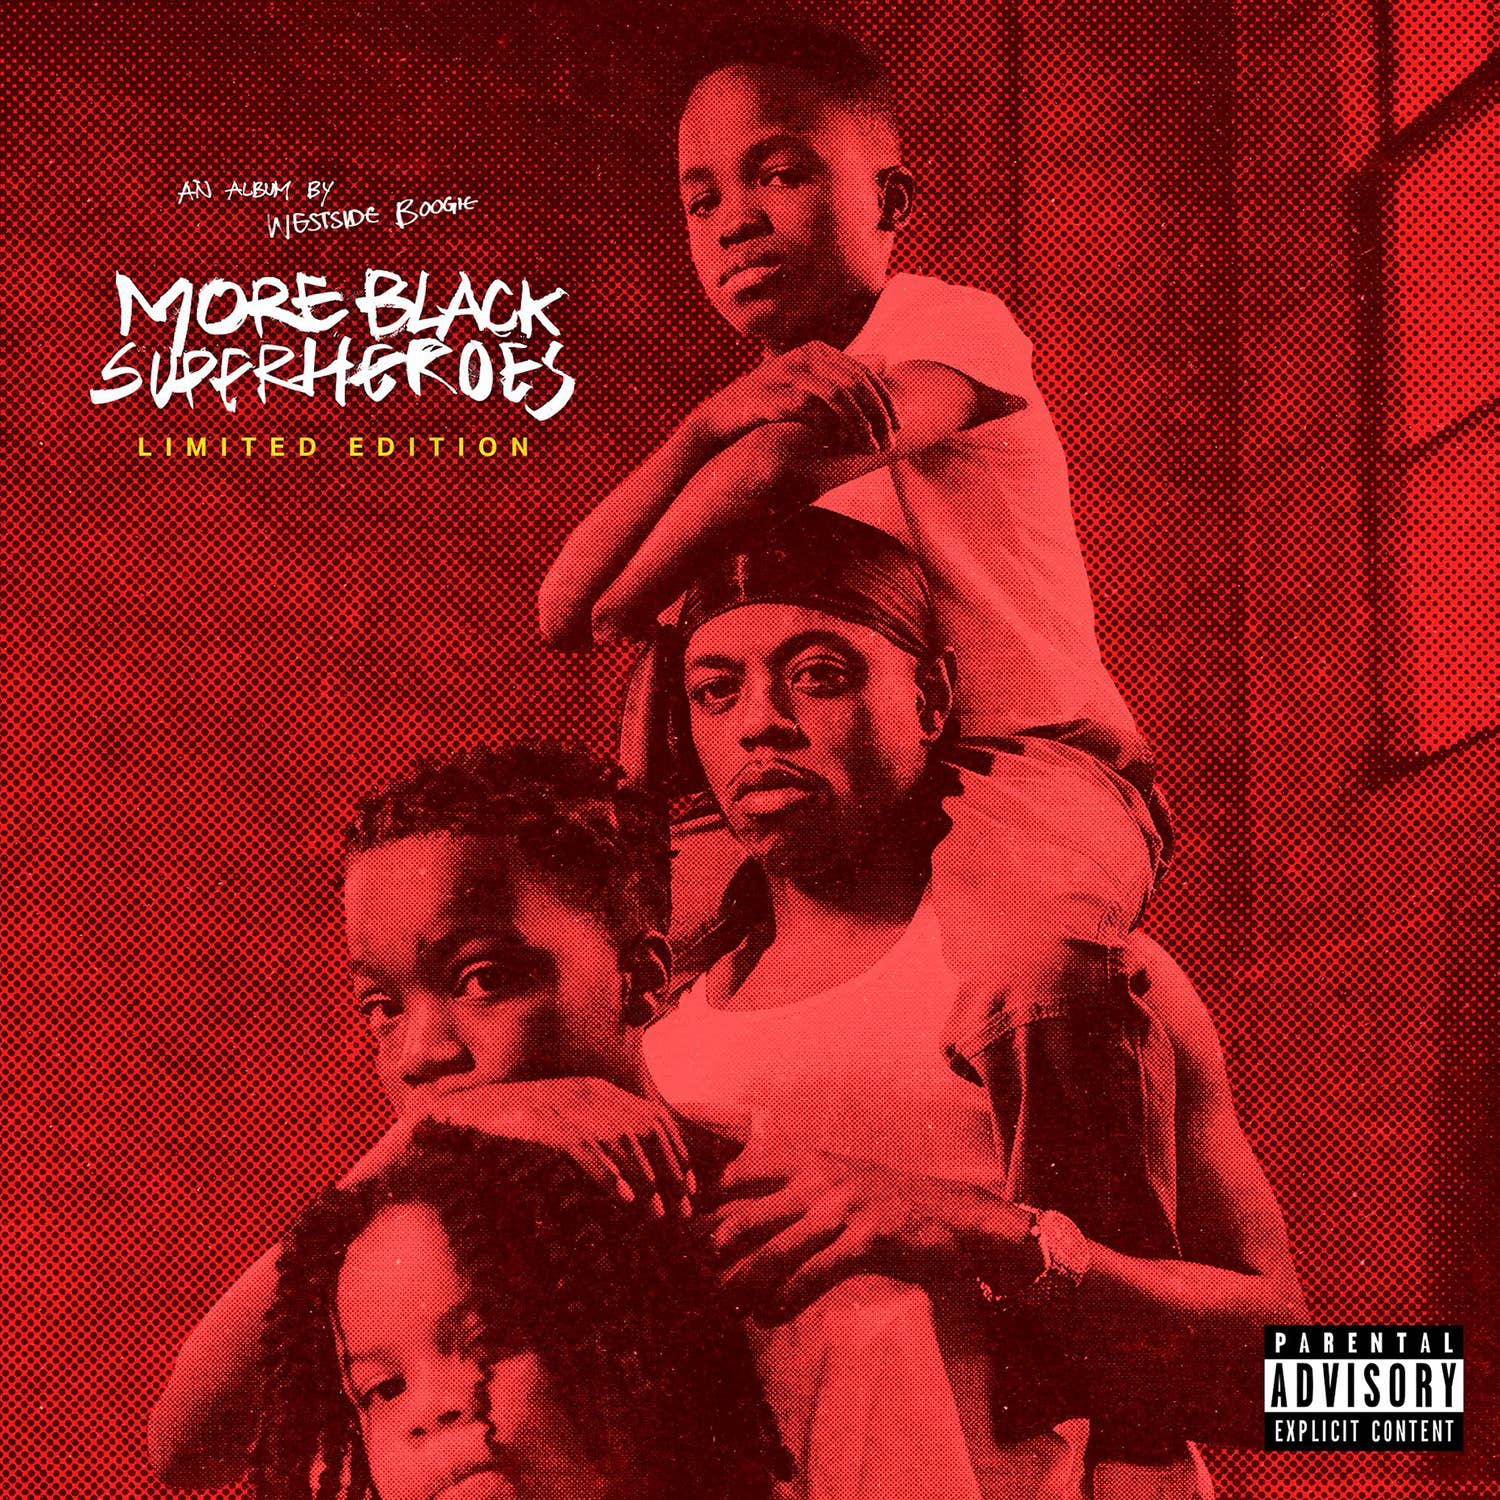 The cover art for Westside Boogie's 'More Black Superheroes' Deluxe